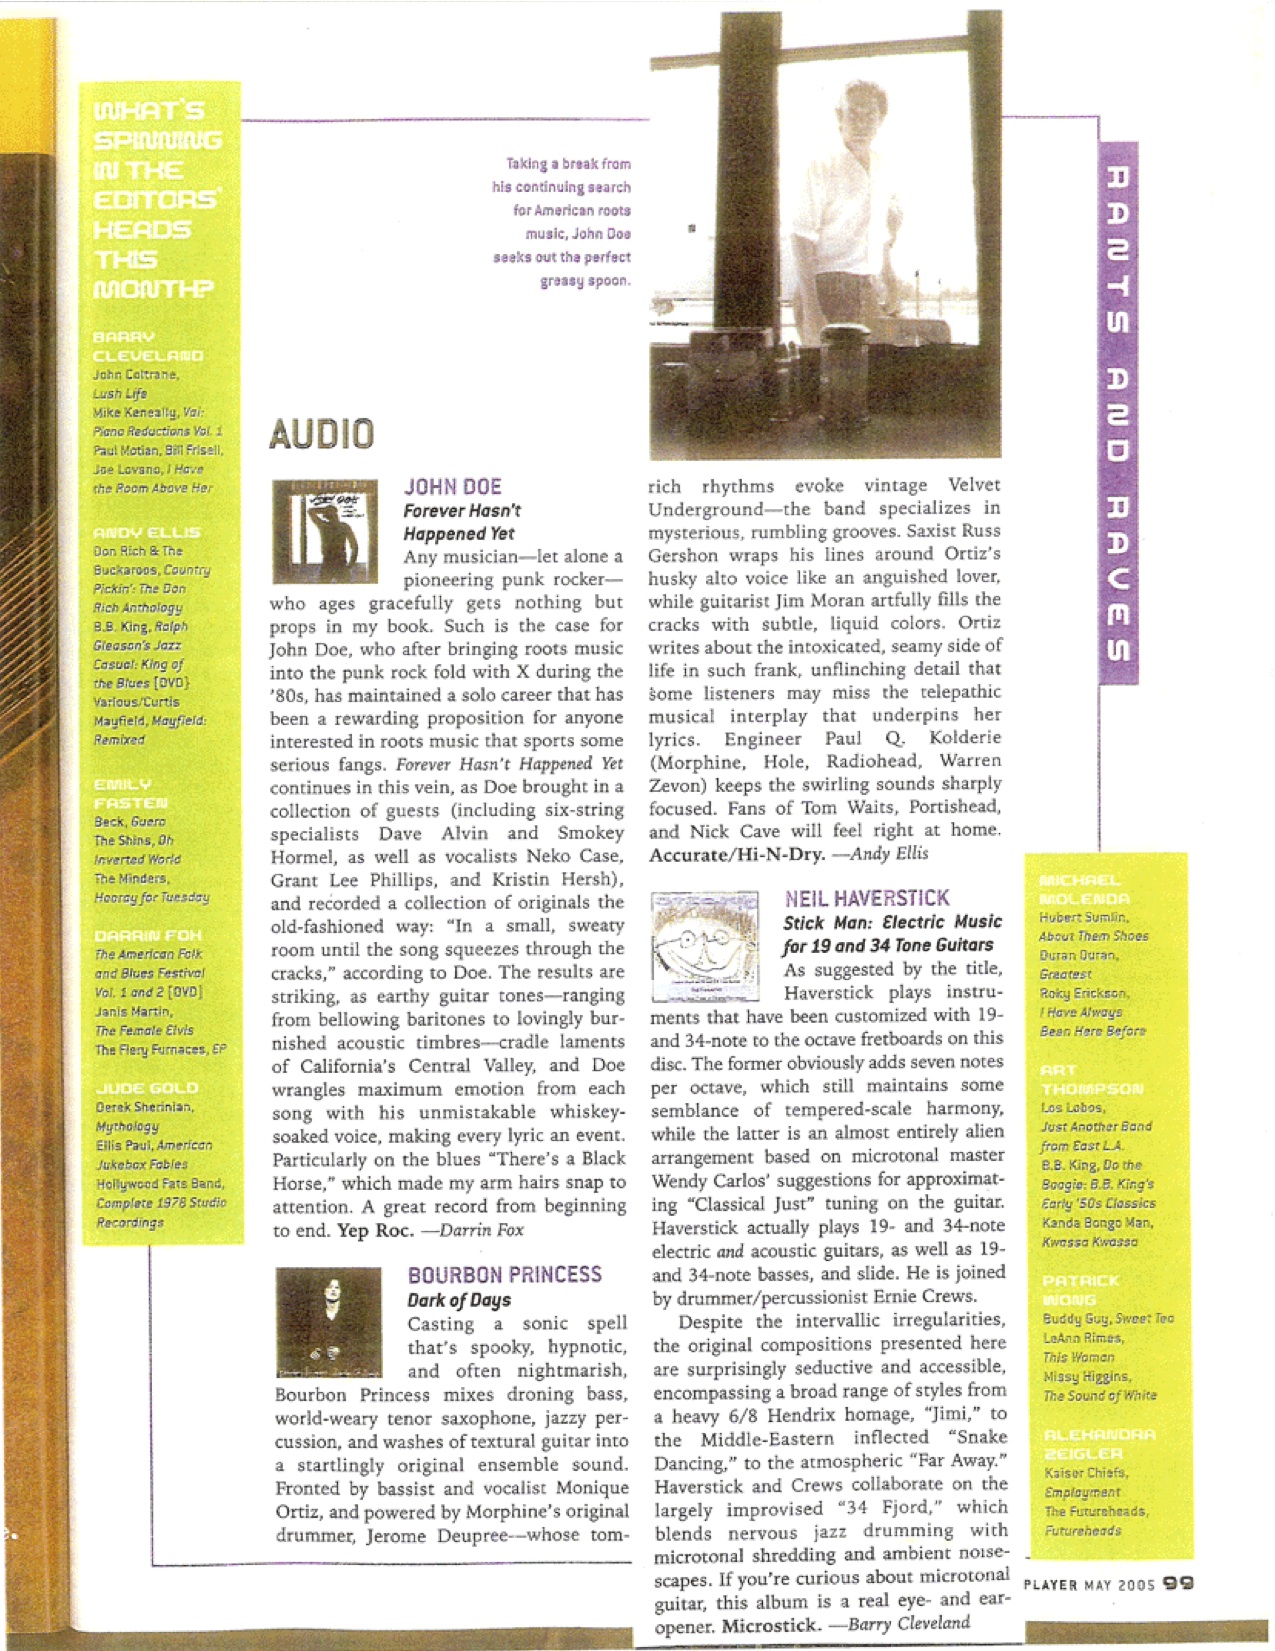 Guitar Player Review May 2005